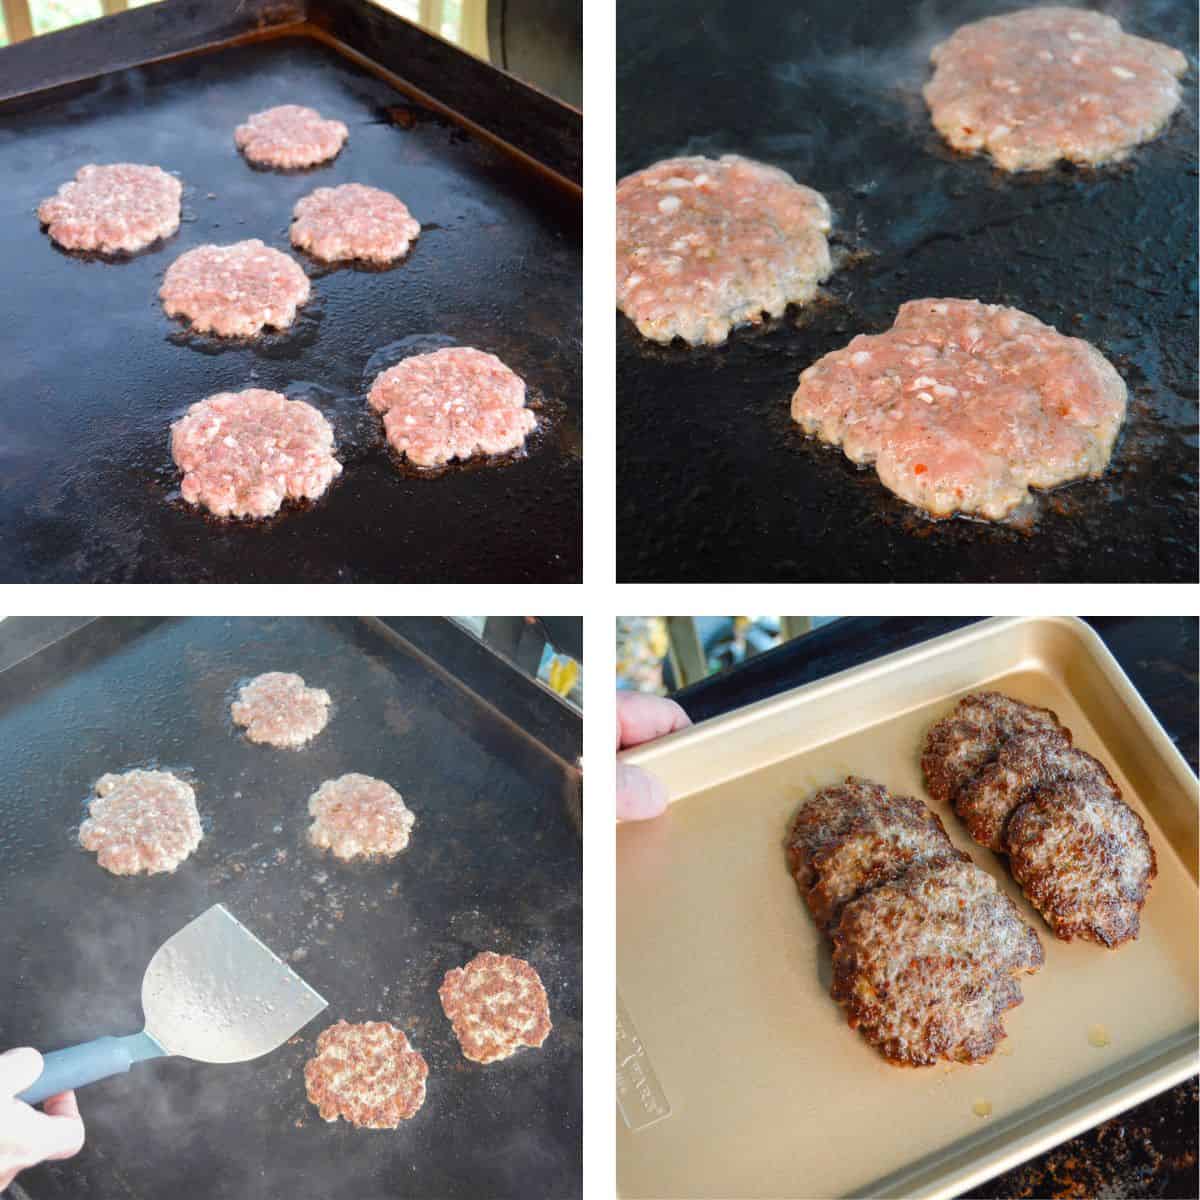 Making Breakfast Sausage Patties on the Blackstone in 4 images